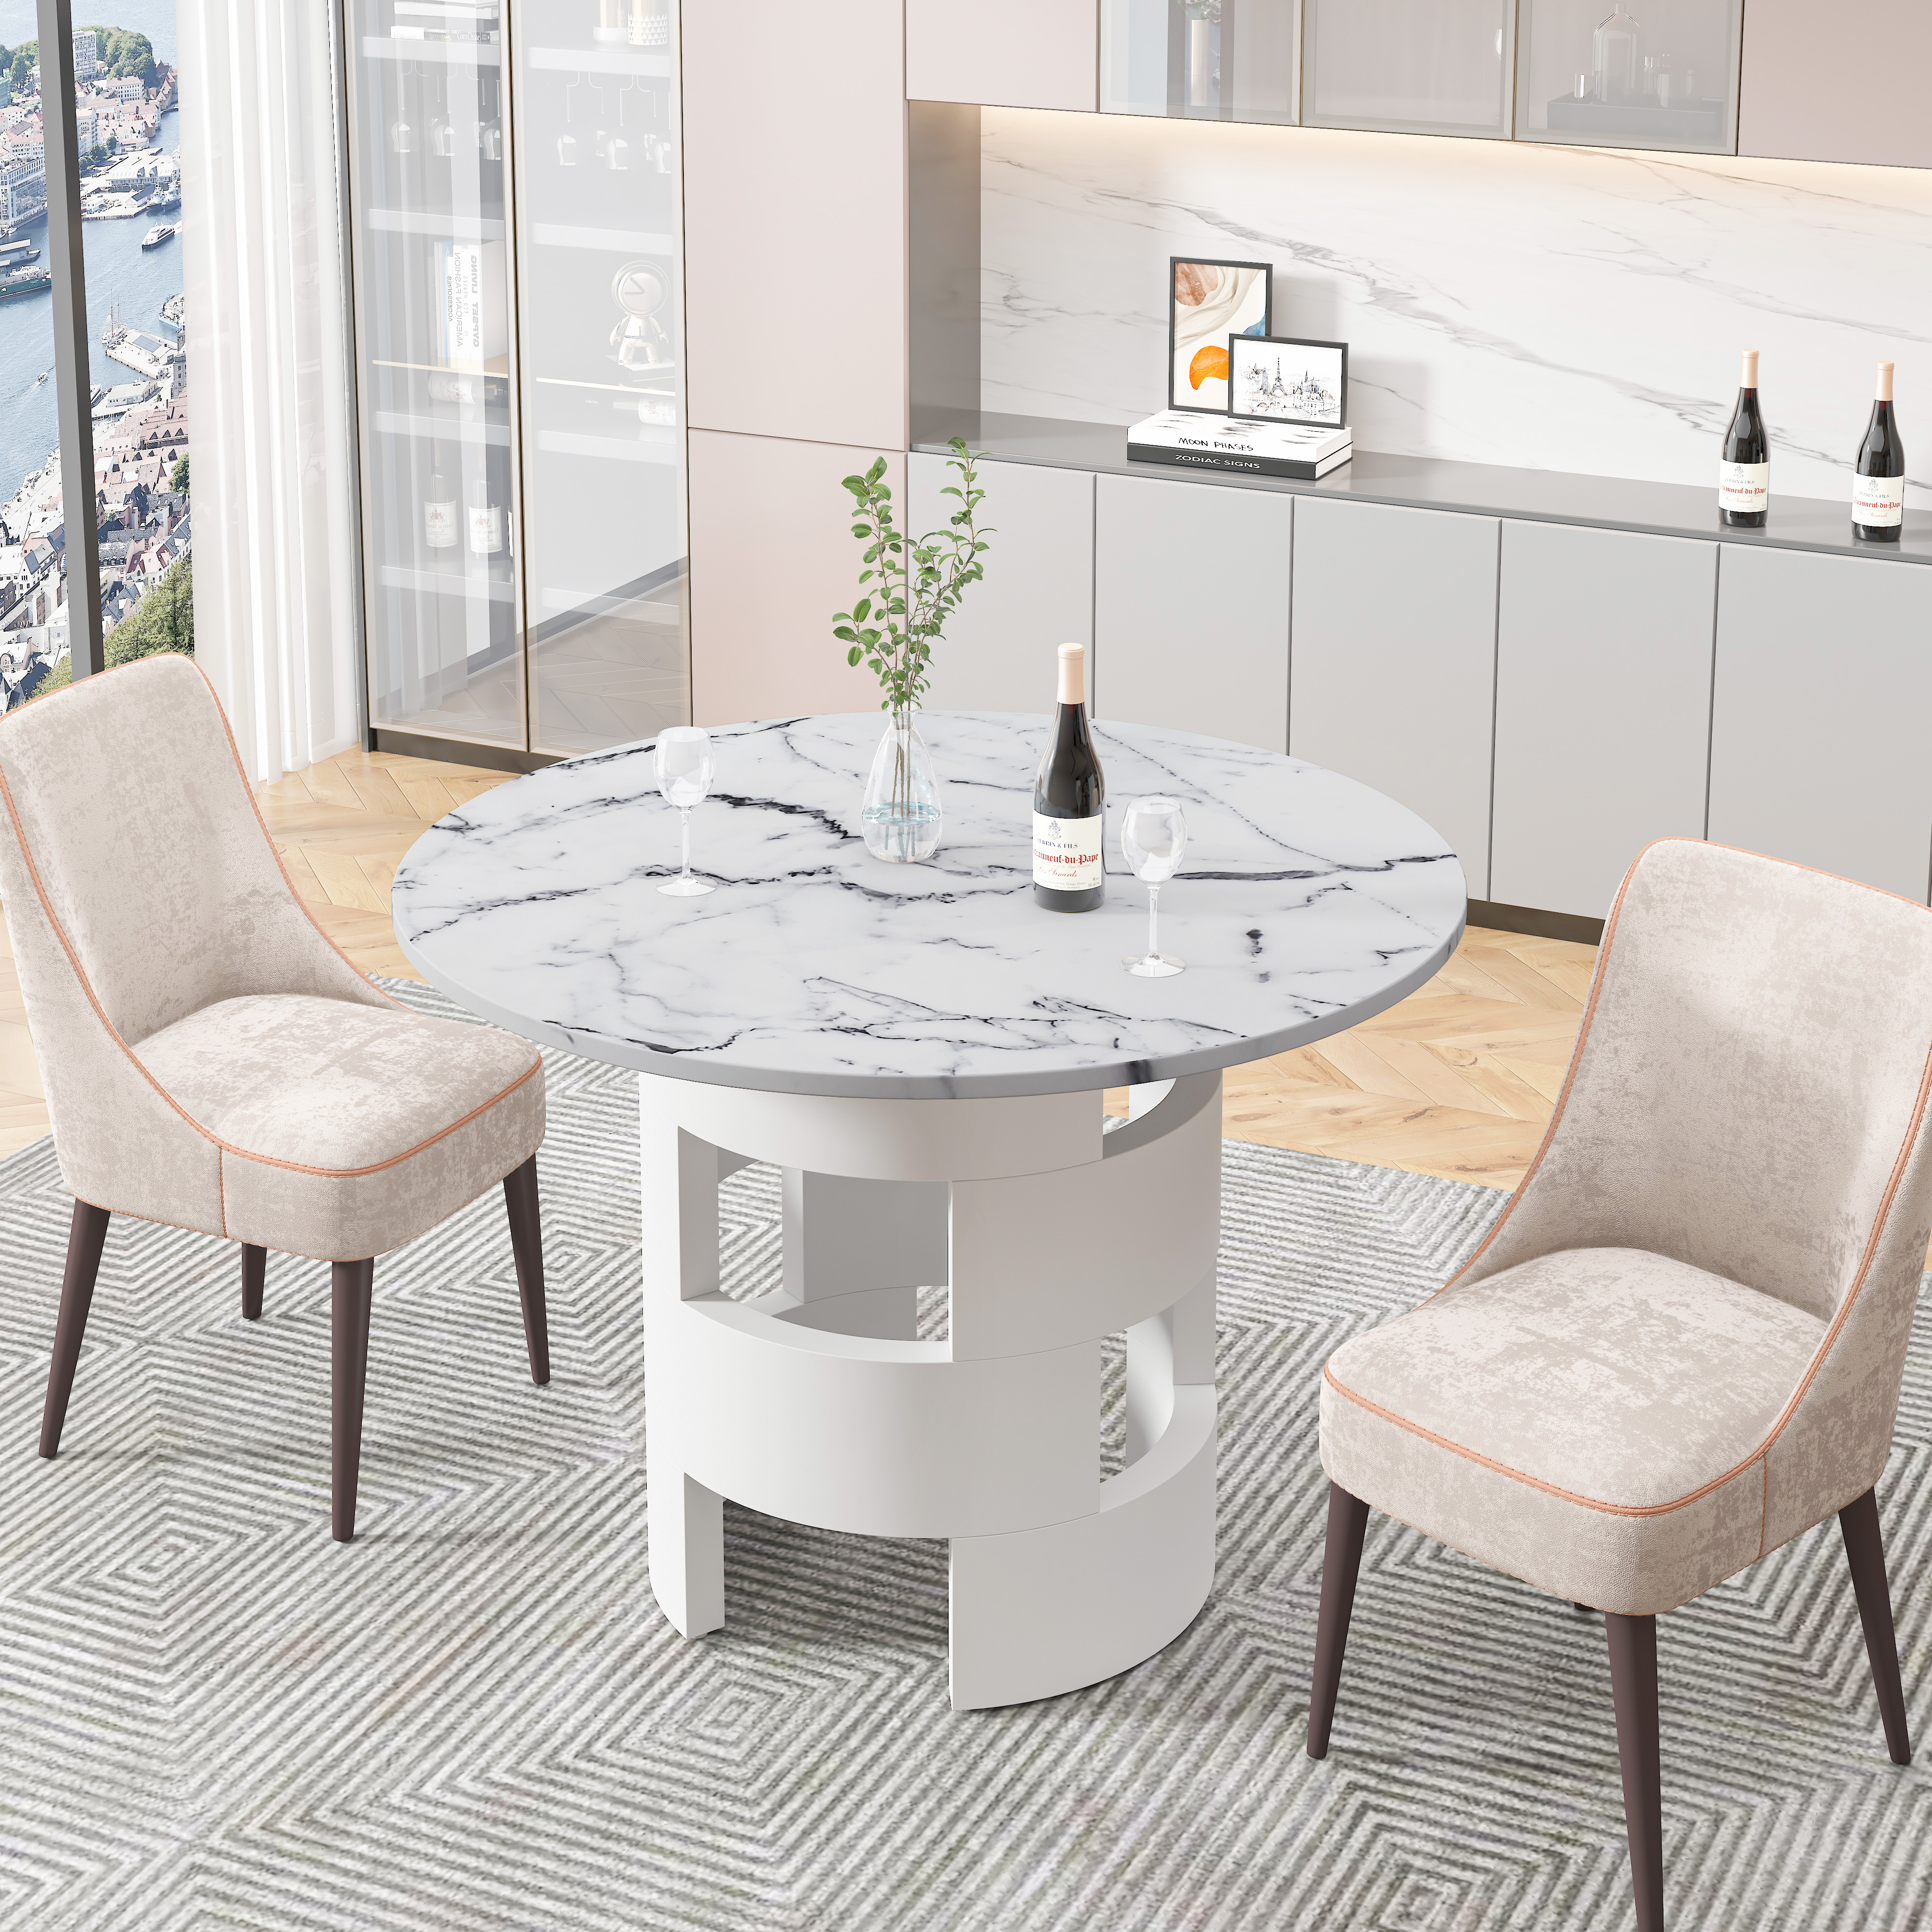 42.12"Modern Round Dining Table with Printed White Marble Table Top for Dining Room, Kitchen, Living Room